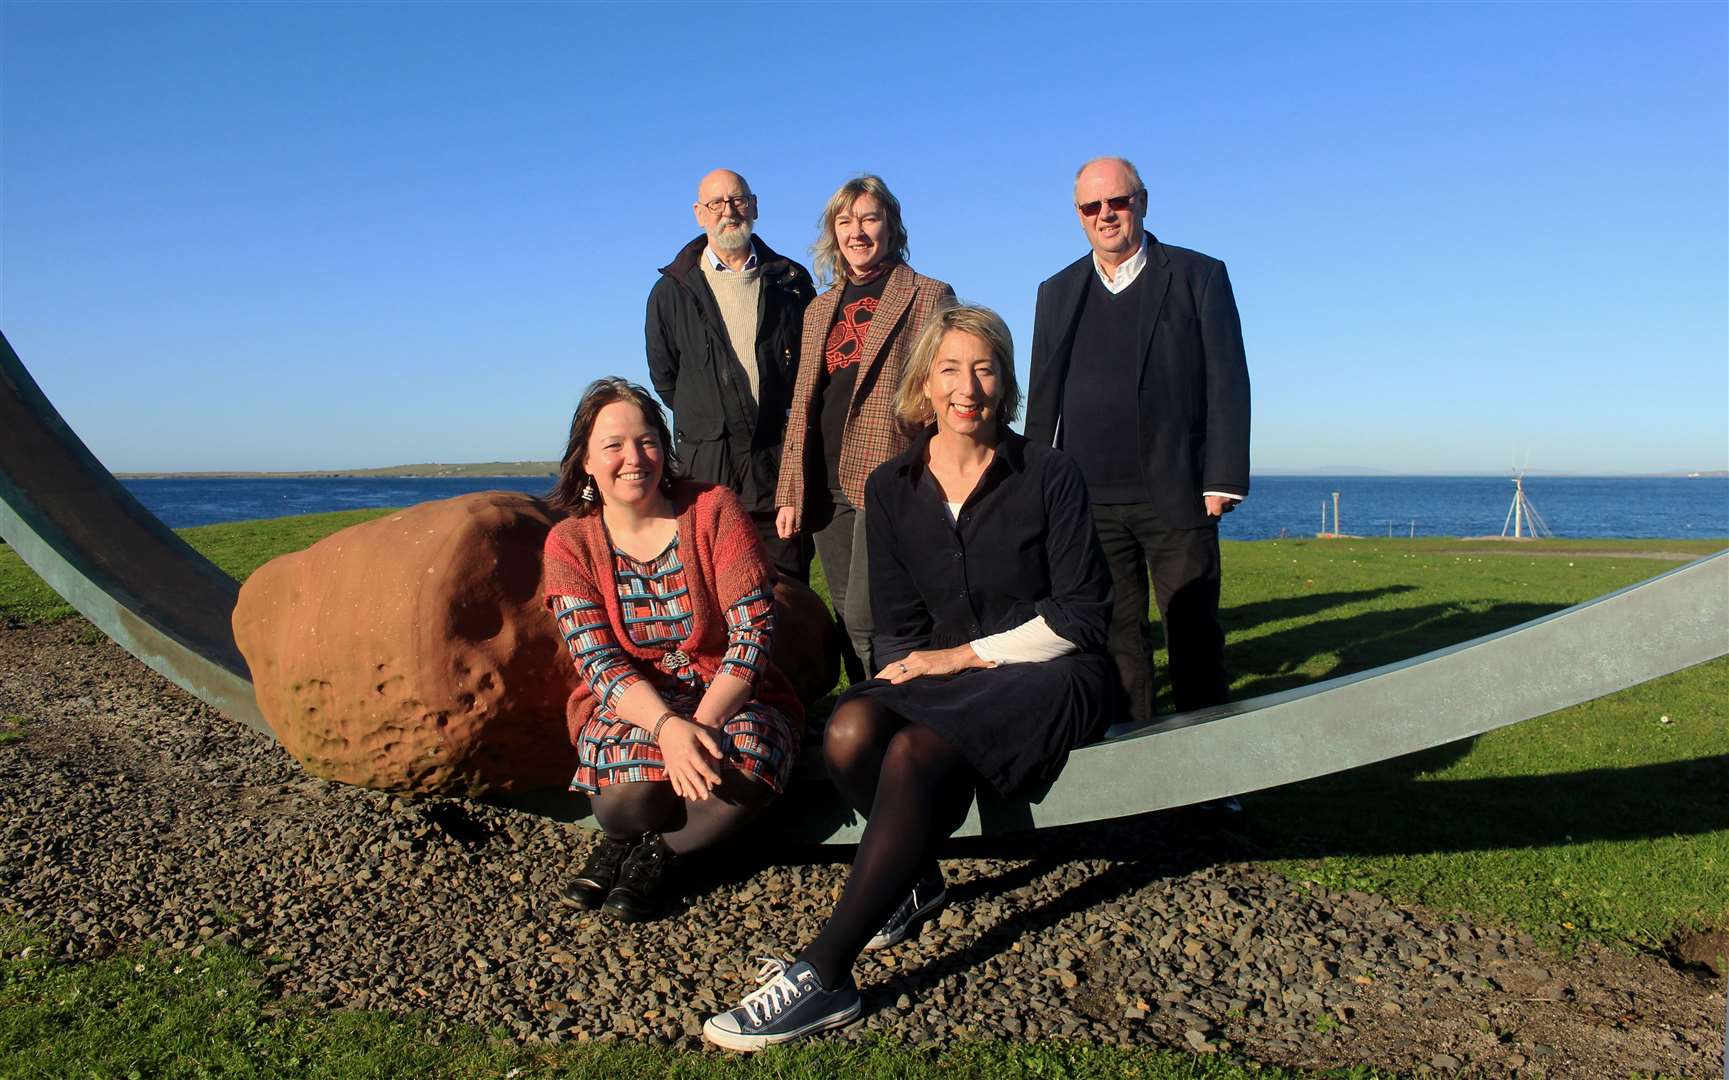 Barbara Henderson (front, left) and fellow writers Jenny Colgan (front, right) and Jennifer Morag Henderson with James Miller, who chaired their session at the John O’Groats Book Festival last October, and festival organiser Ian Leith (back, right). Picture: Alan Hendry